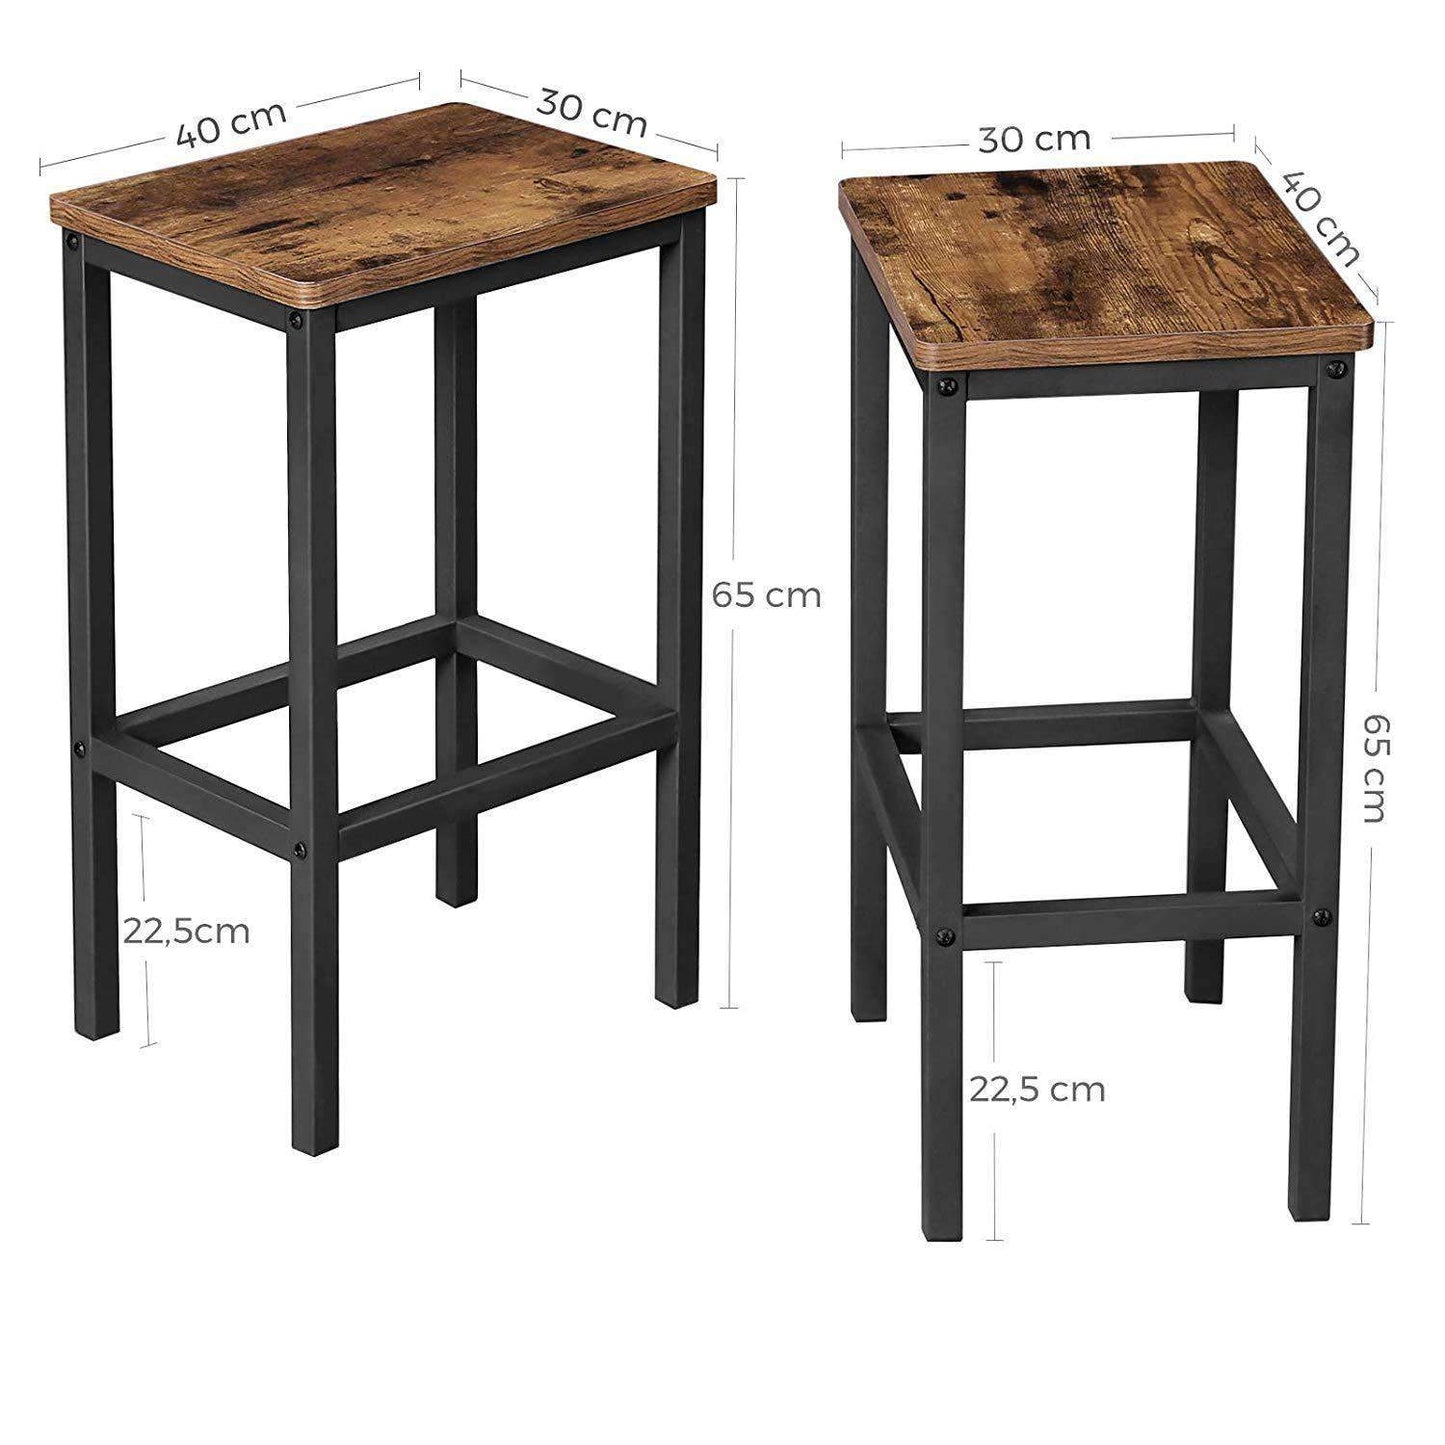 Nancy's Bar Stools Set Of 2 - Bar chairs with footrest - Bar stool Industrial - Dark brown - 40 x 30 x 65 cm